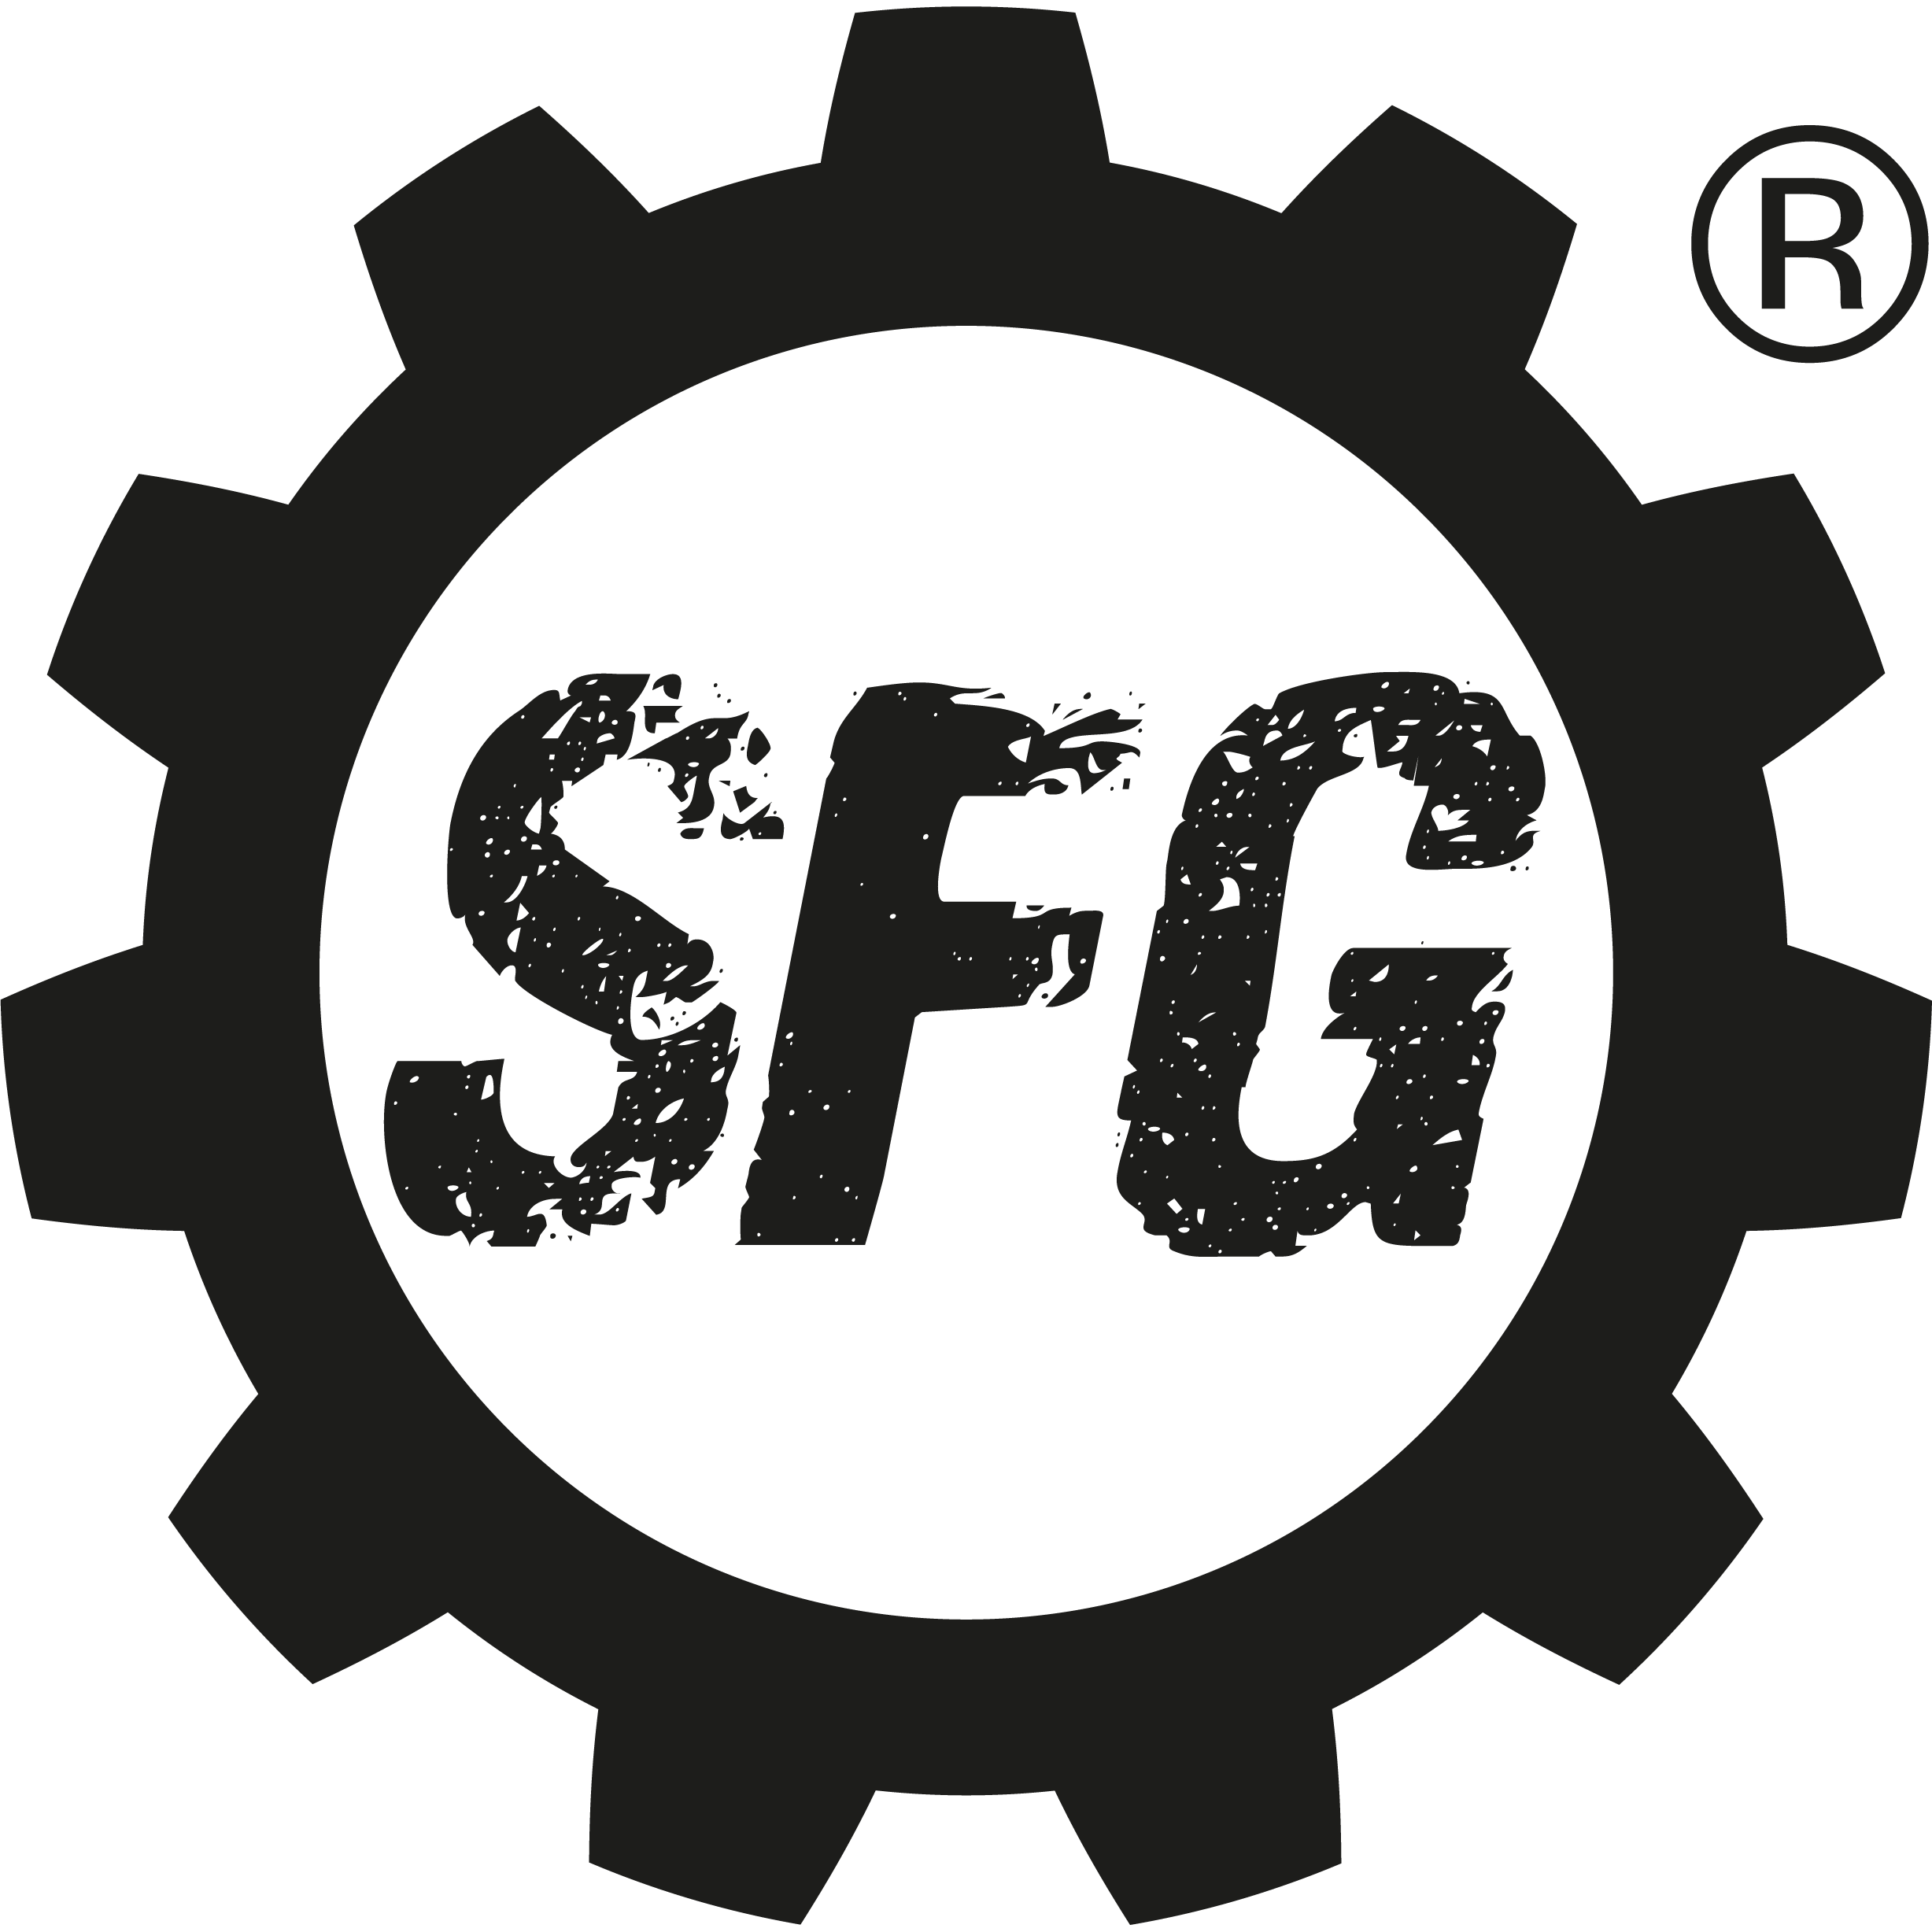 Steamforged Games